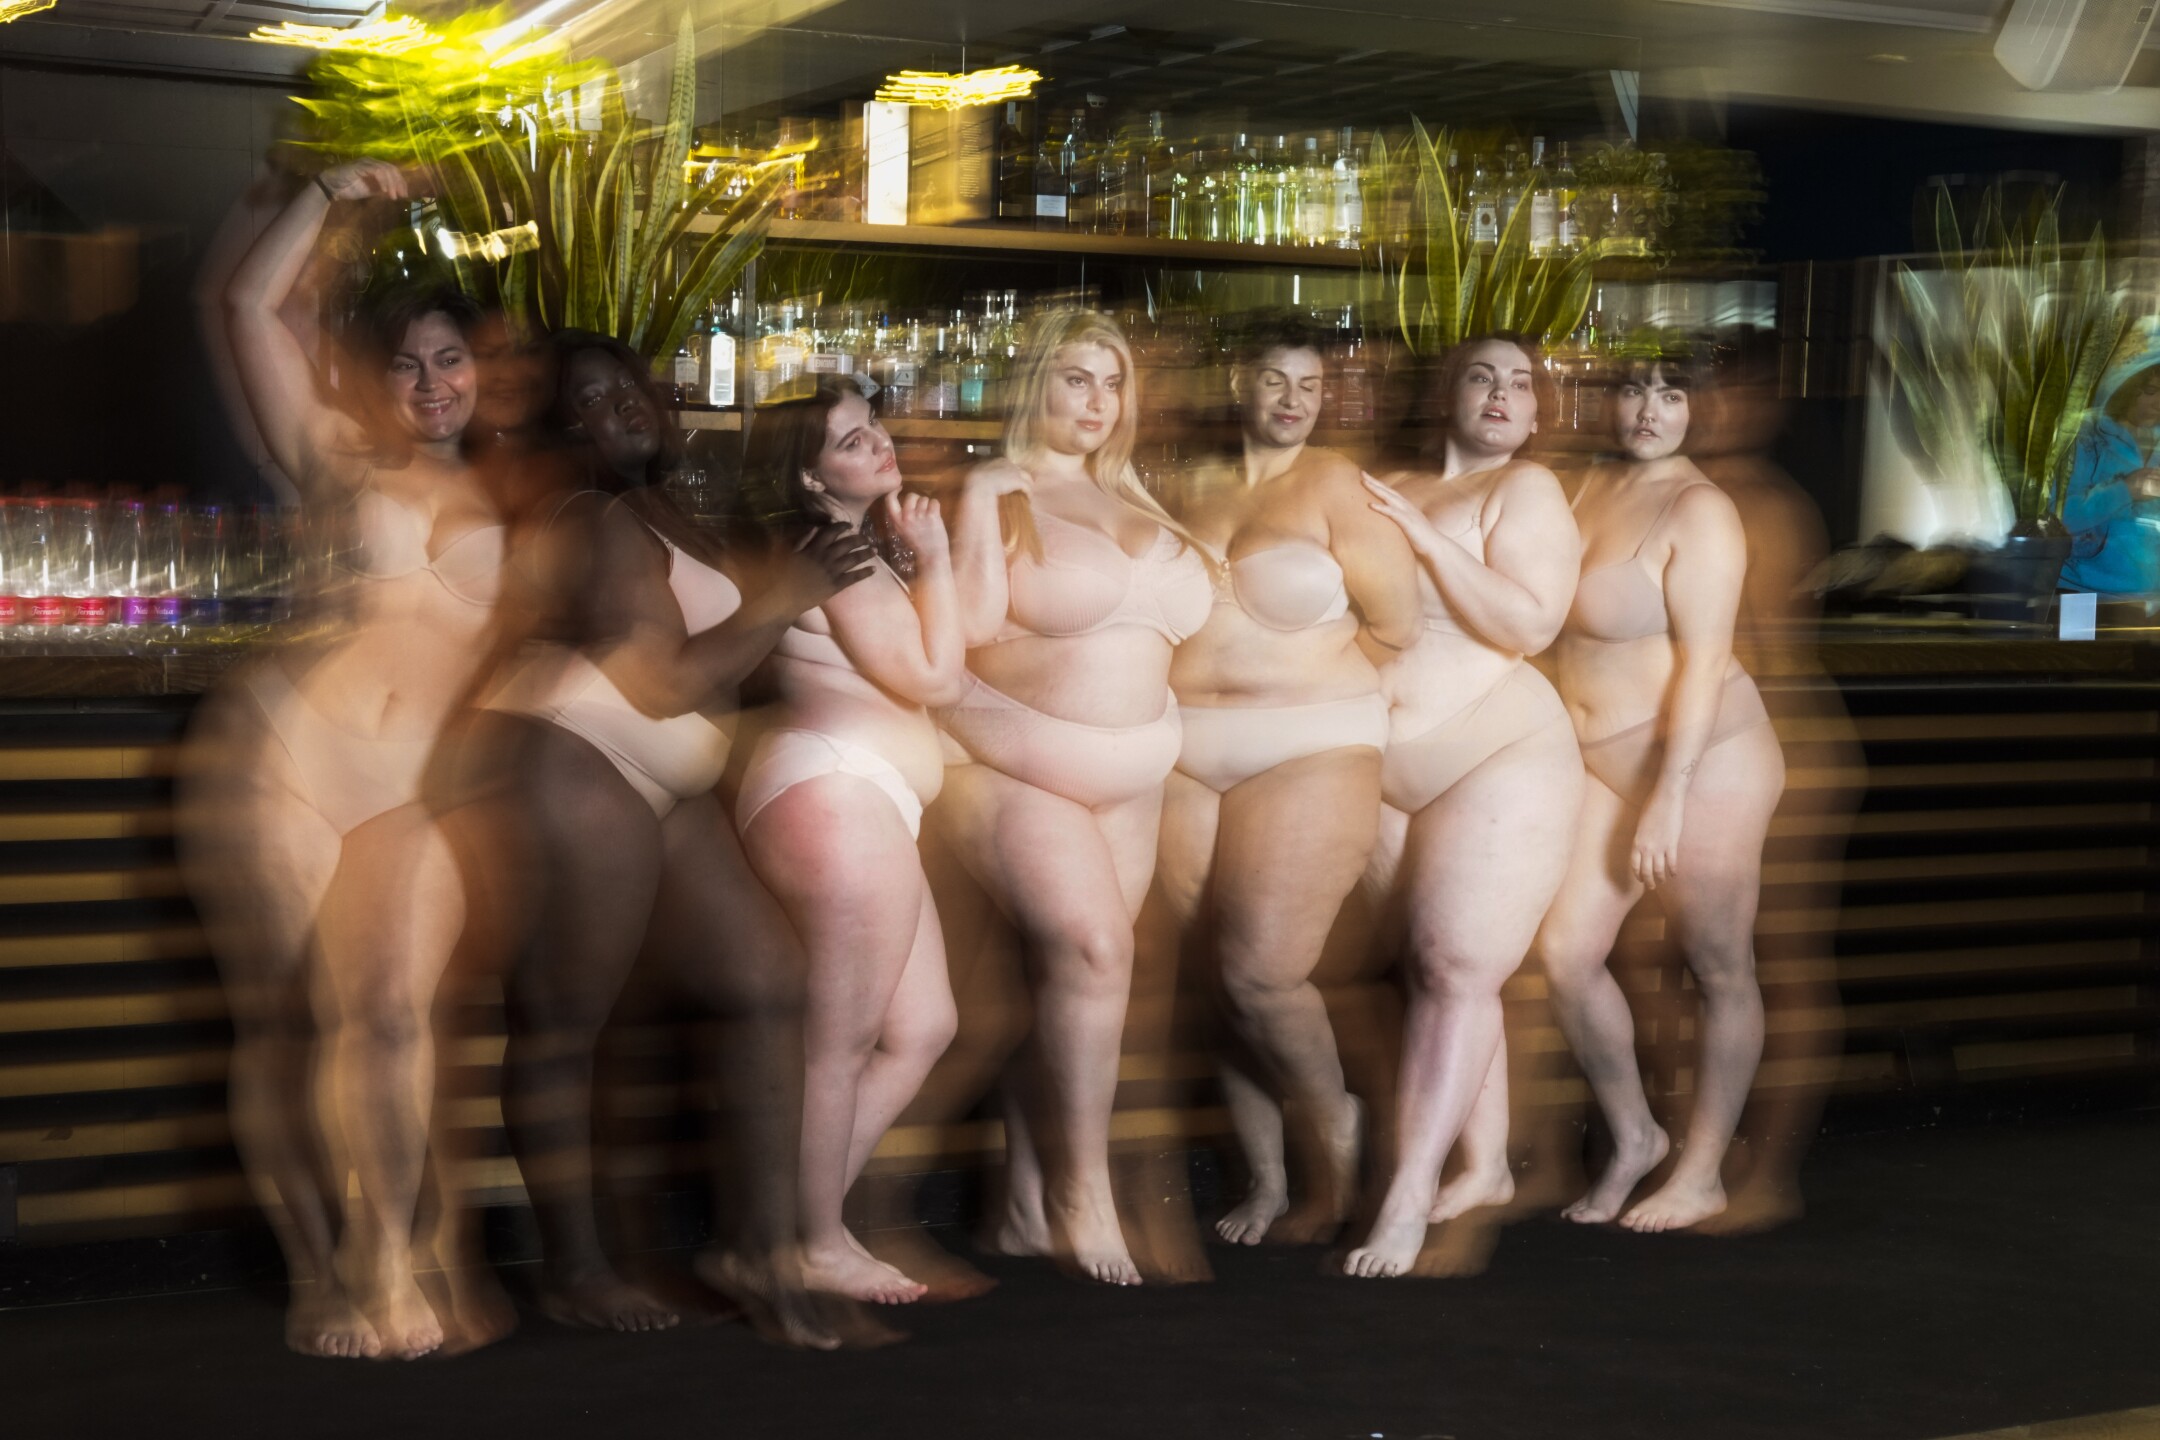 Models pose during a photo shoot for L'Imperfetta (The Imperfect) model agency in Rome on Feb. 7, 2023. The agency represents people who don't fit neatly into the fashion industry's pre-established standards of beauty. (AP Photo/Alessandra Tarantino)